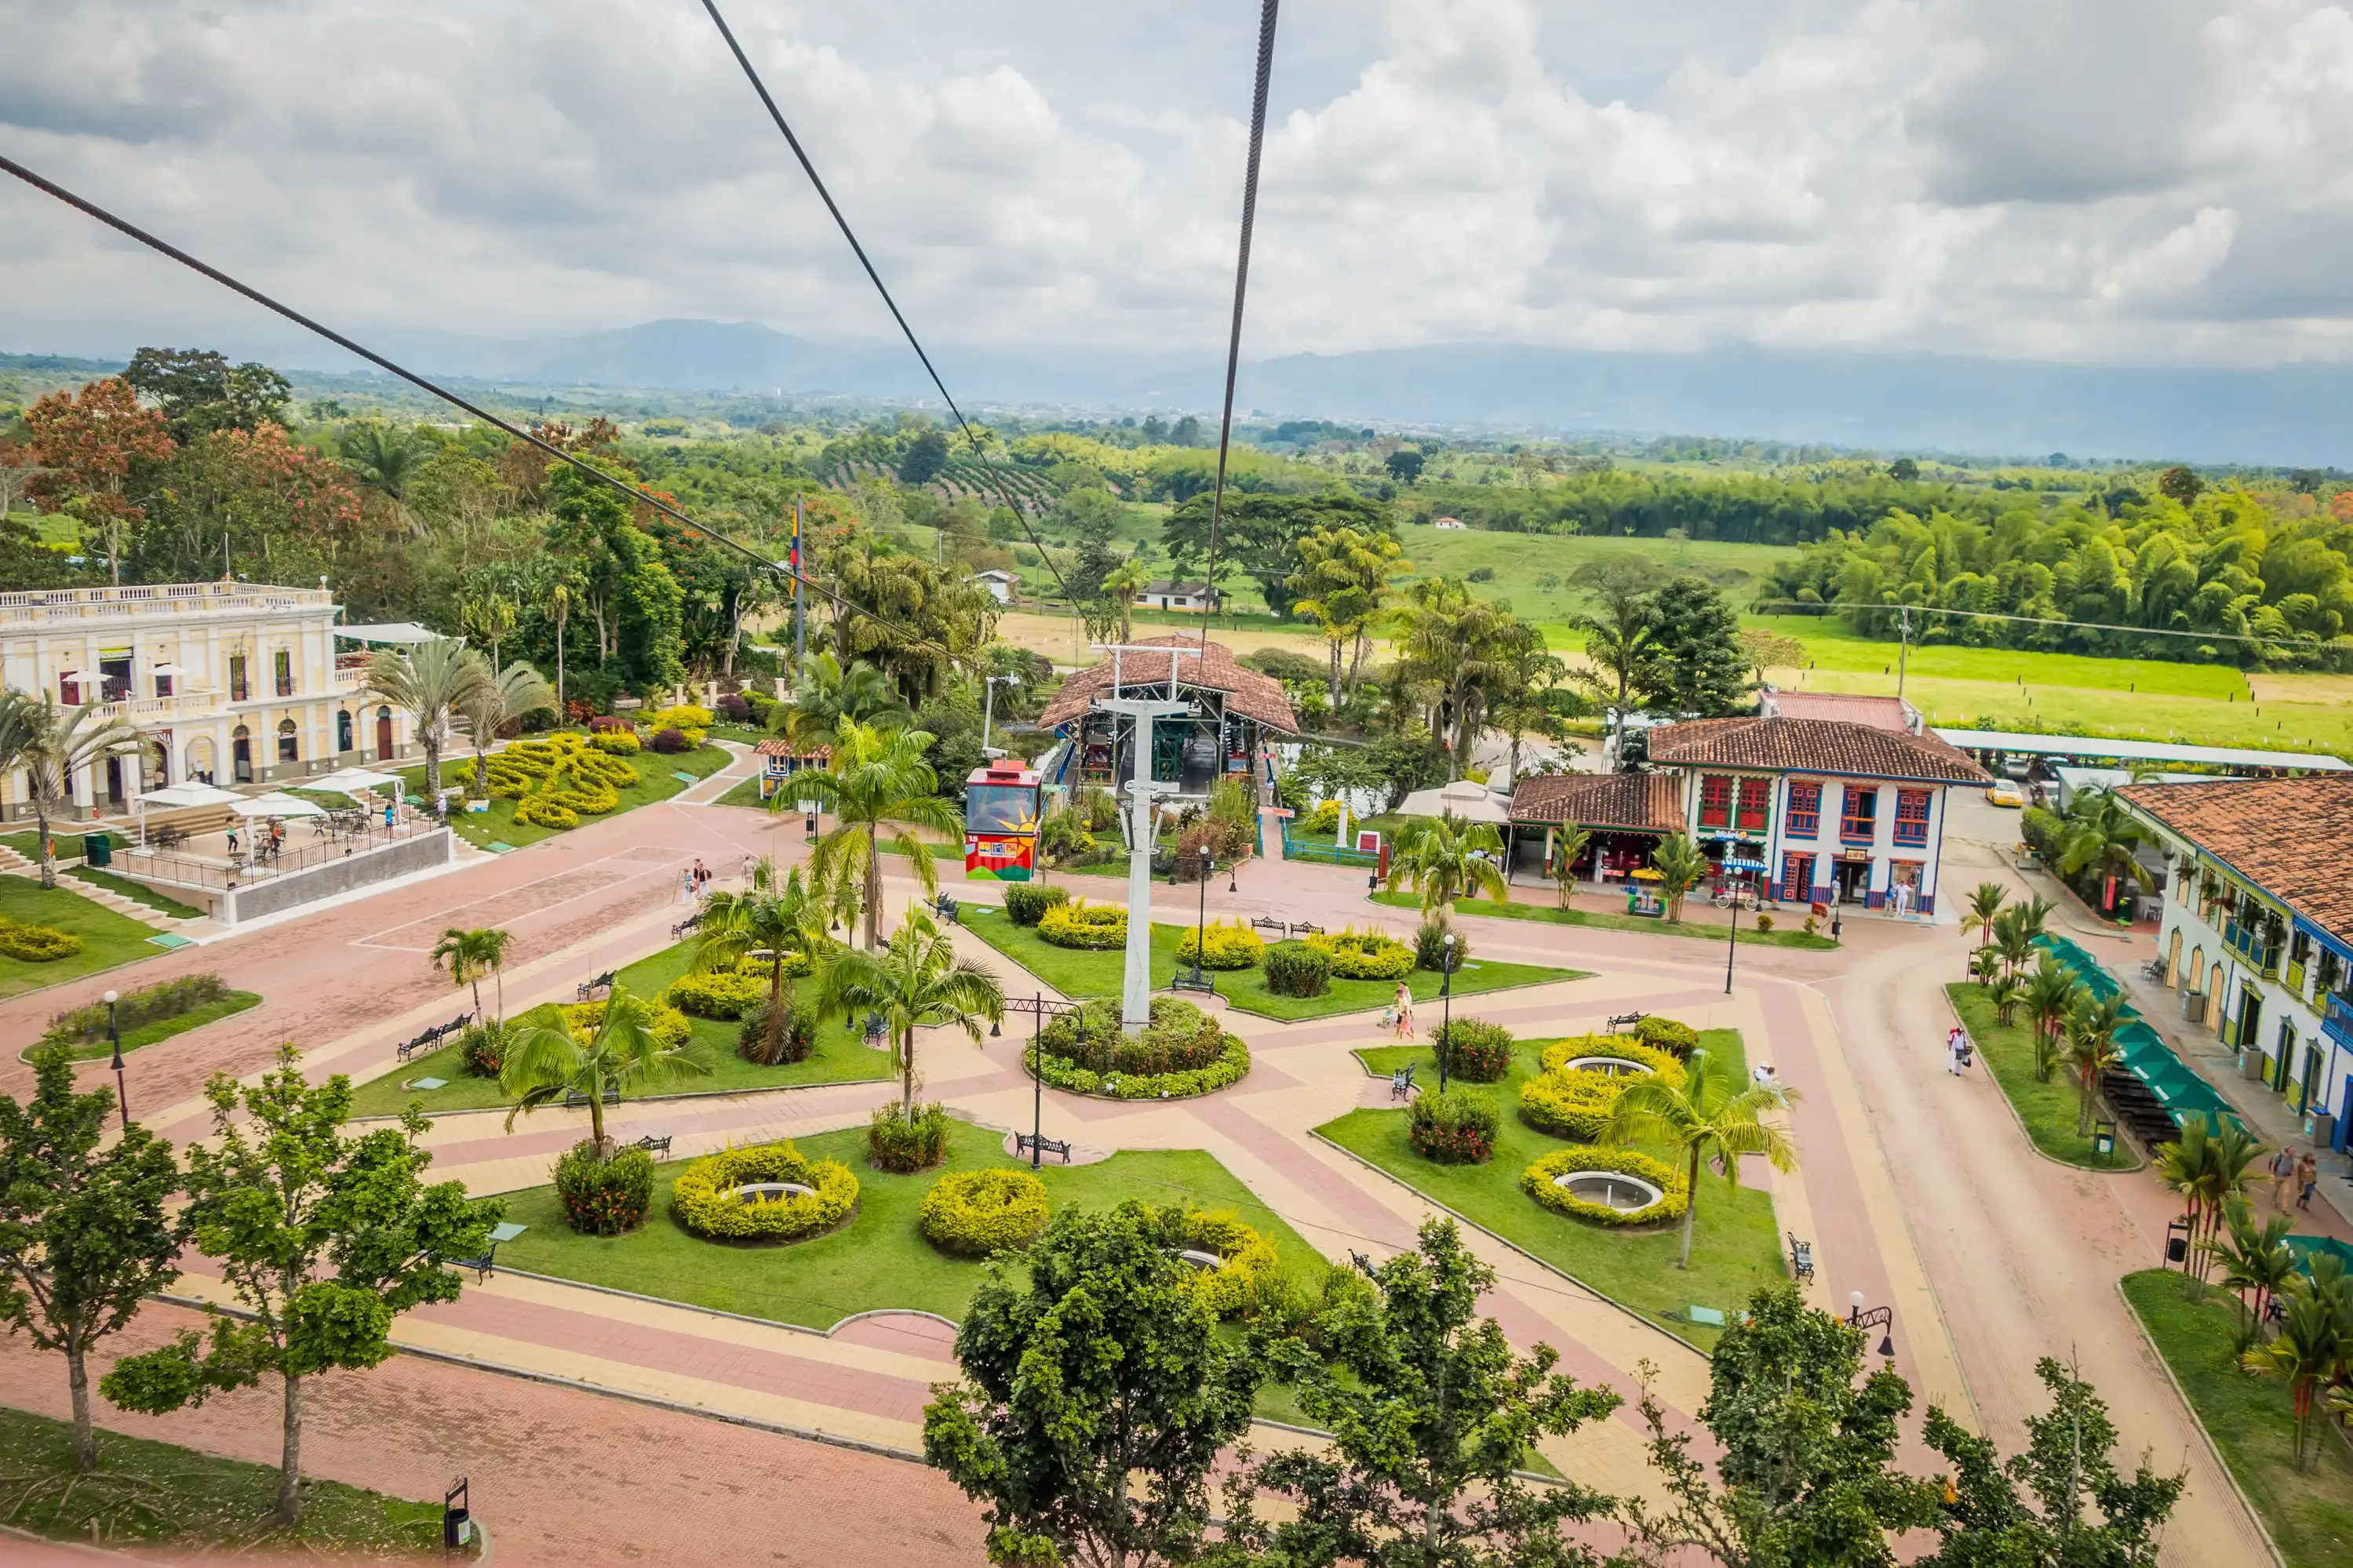 Quindío Department hotels. Best hotels in Quindío Department, Colombia